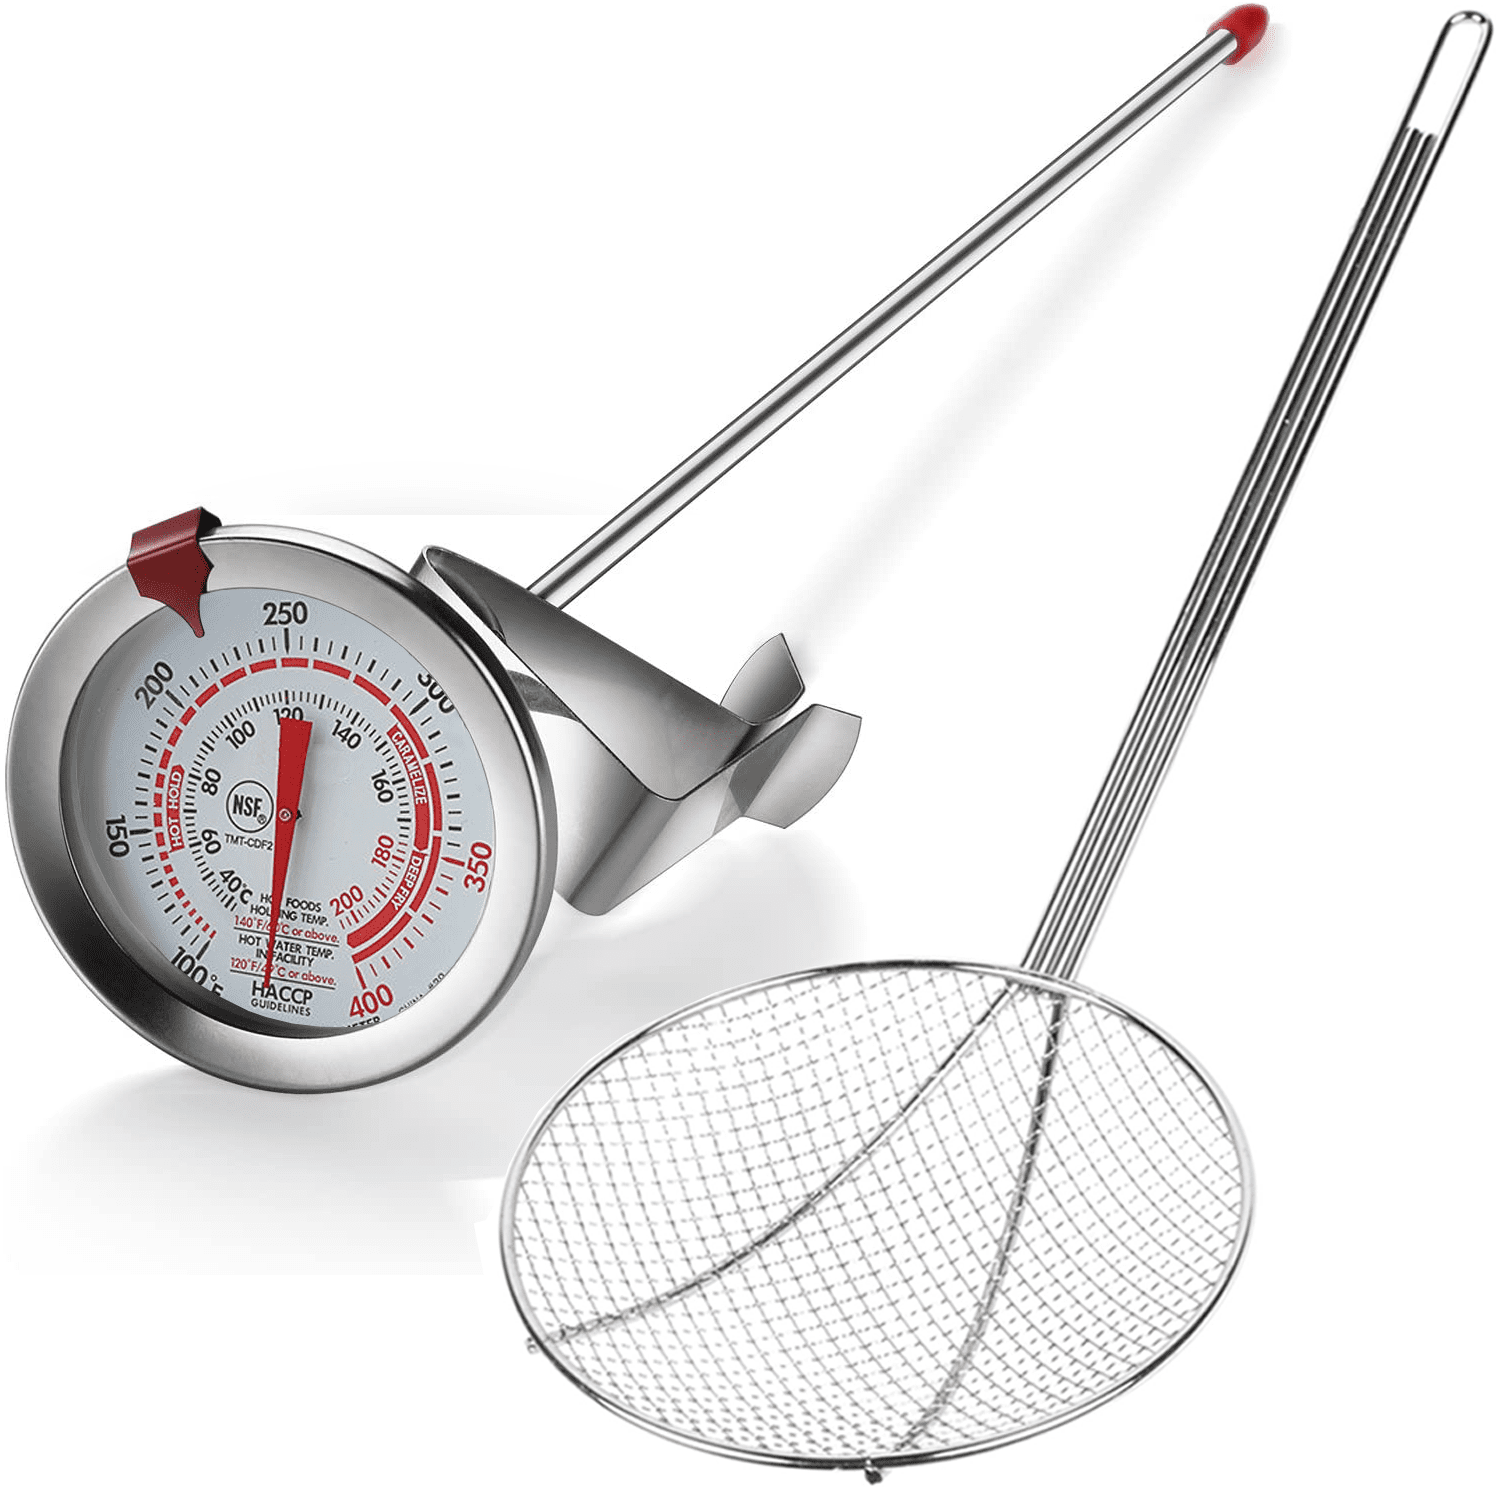 Casewin Deep Fryer Turkey Thermometer with Clip&12 inch - Best Professional  Kitchen Pot Fryer Thermometer, Stainless Steel Fry Oil Thermometer, dial  Thermometer for Candy and Meat Cooking 